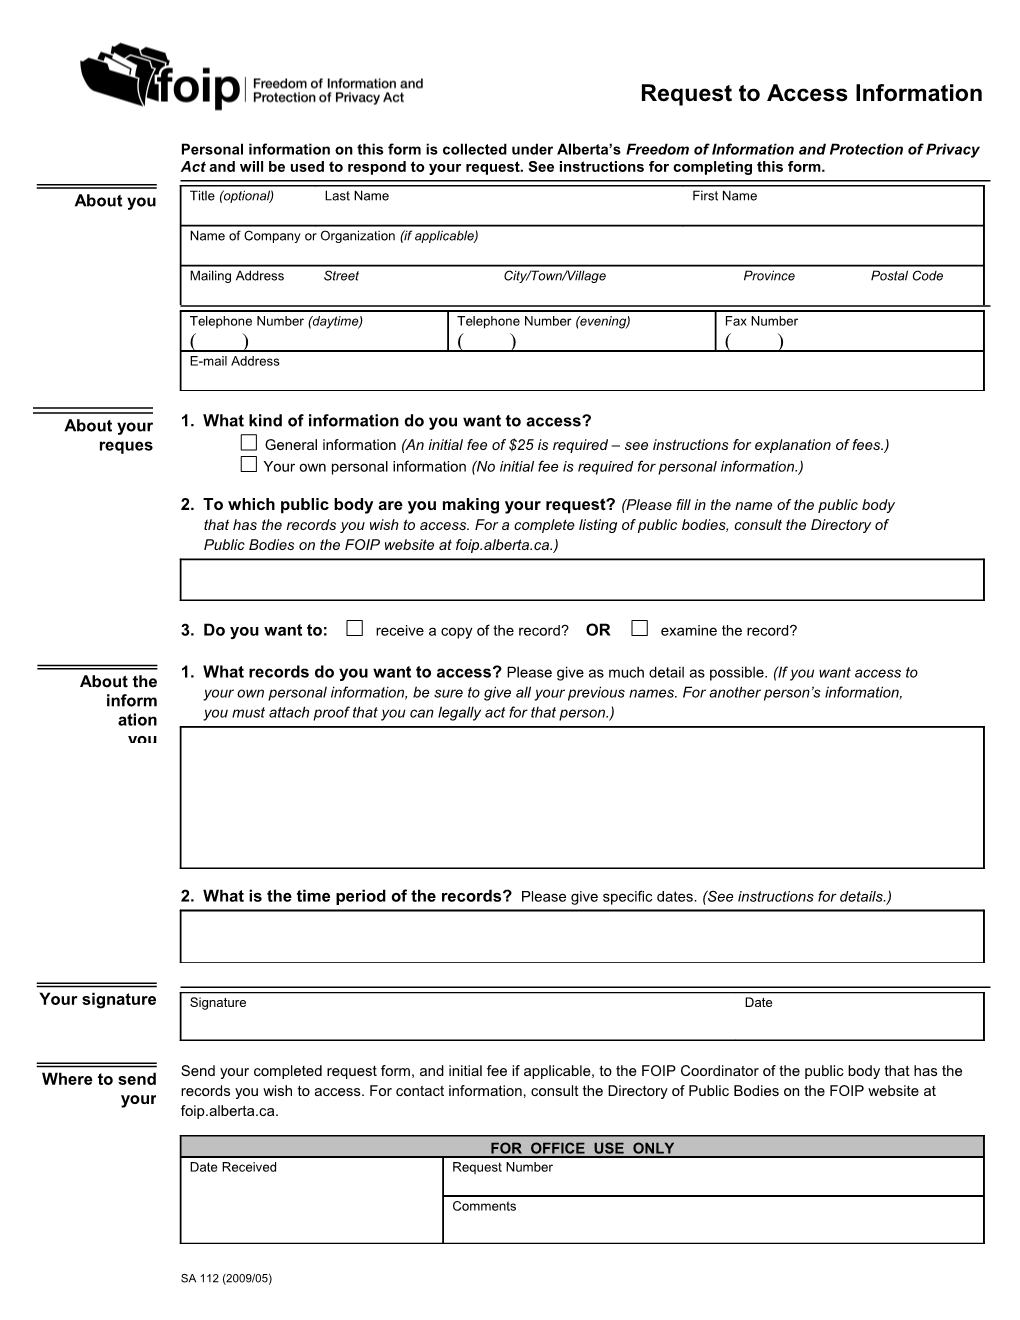 Request to Access Information Form